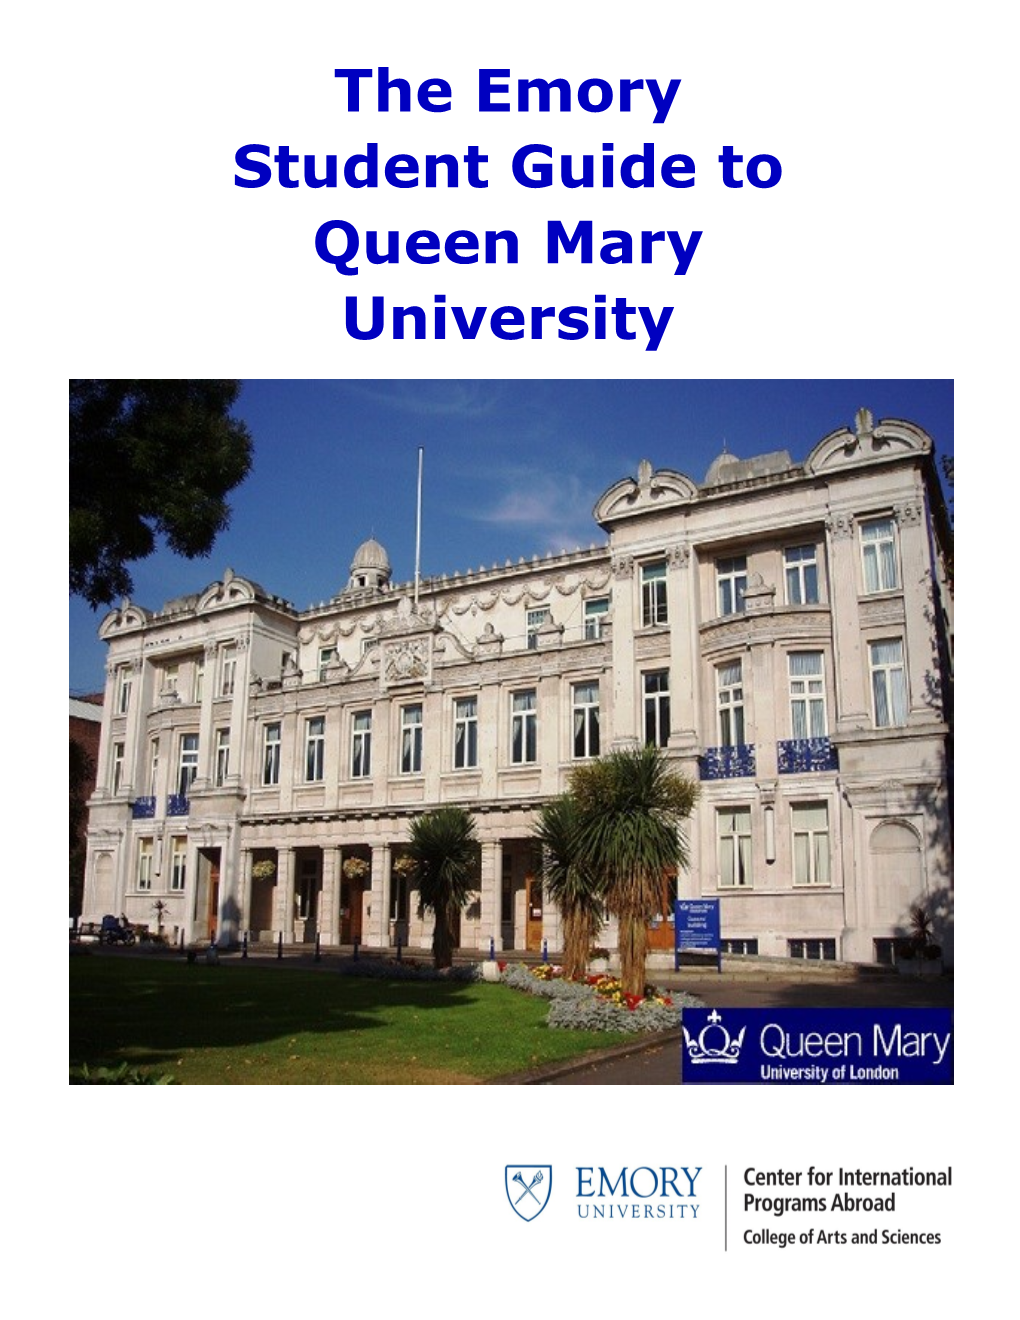 The Emory Student Guide to Queen Mary University Meet the Author